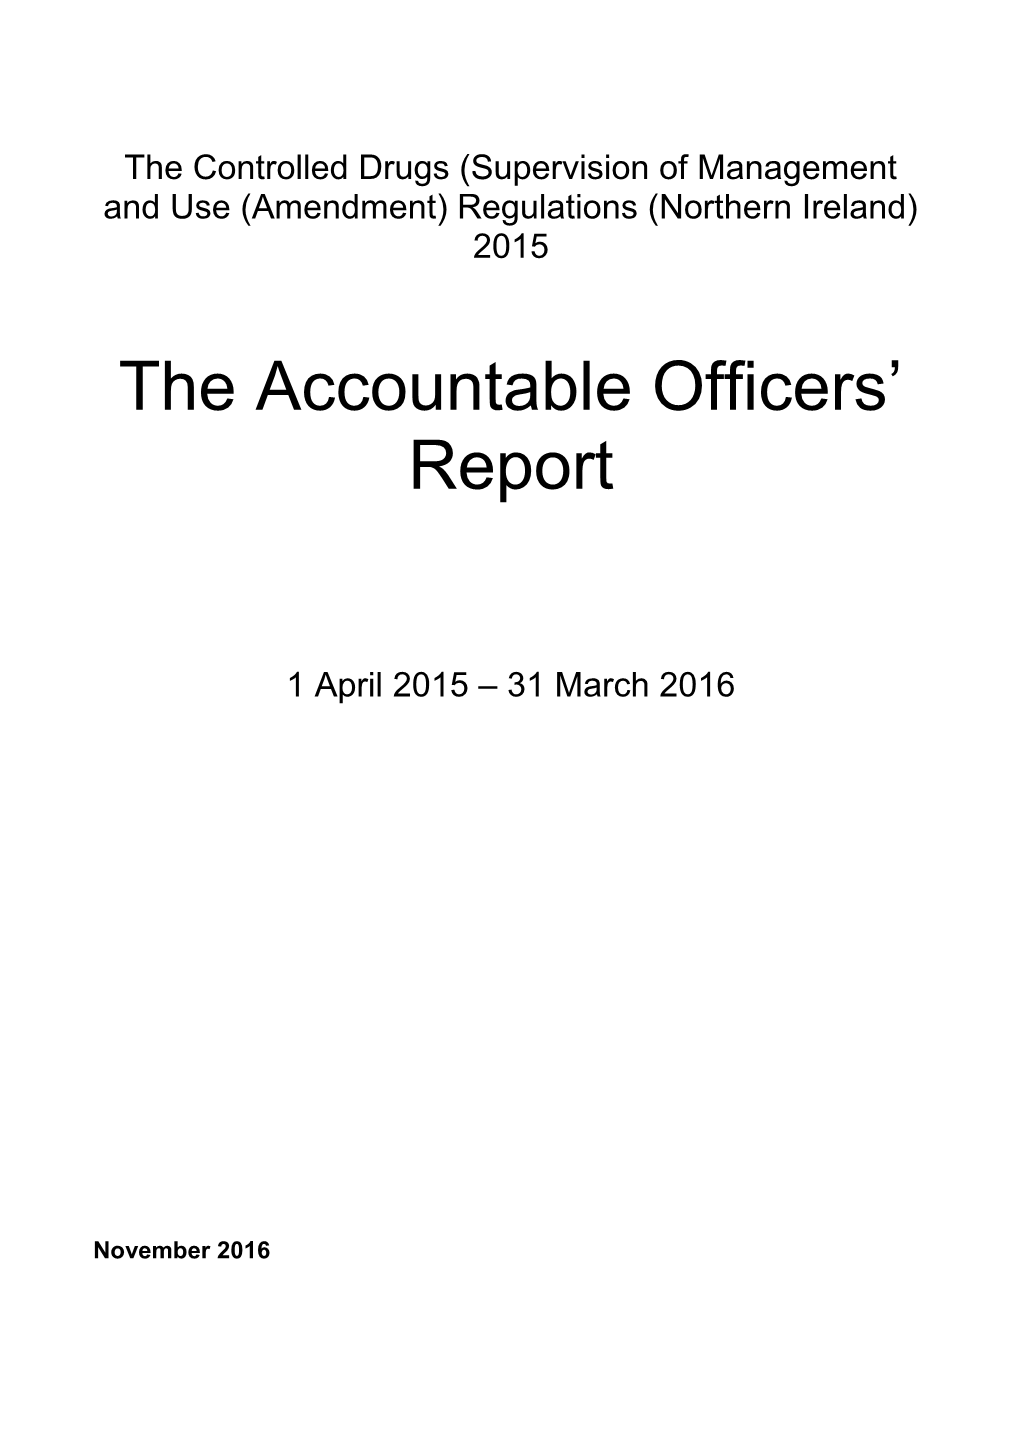 The Accountable Officers Report